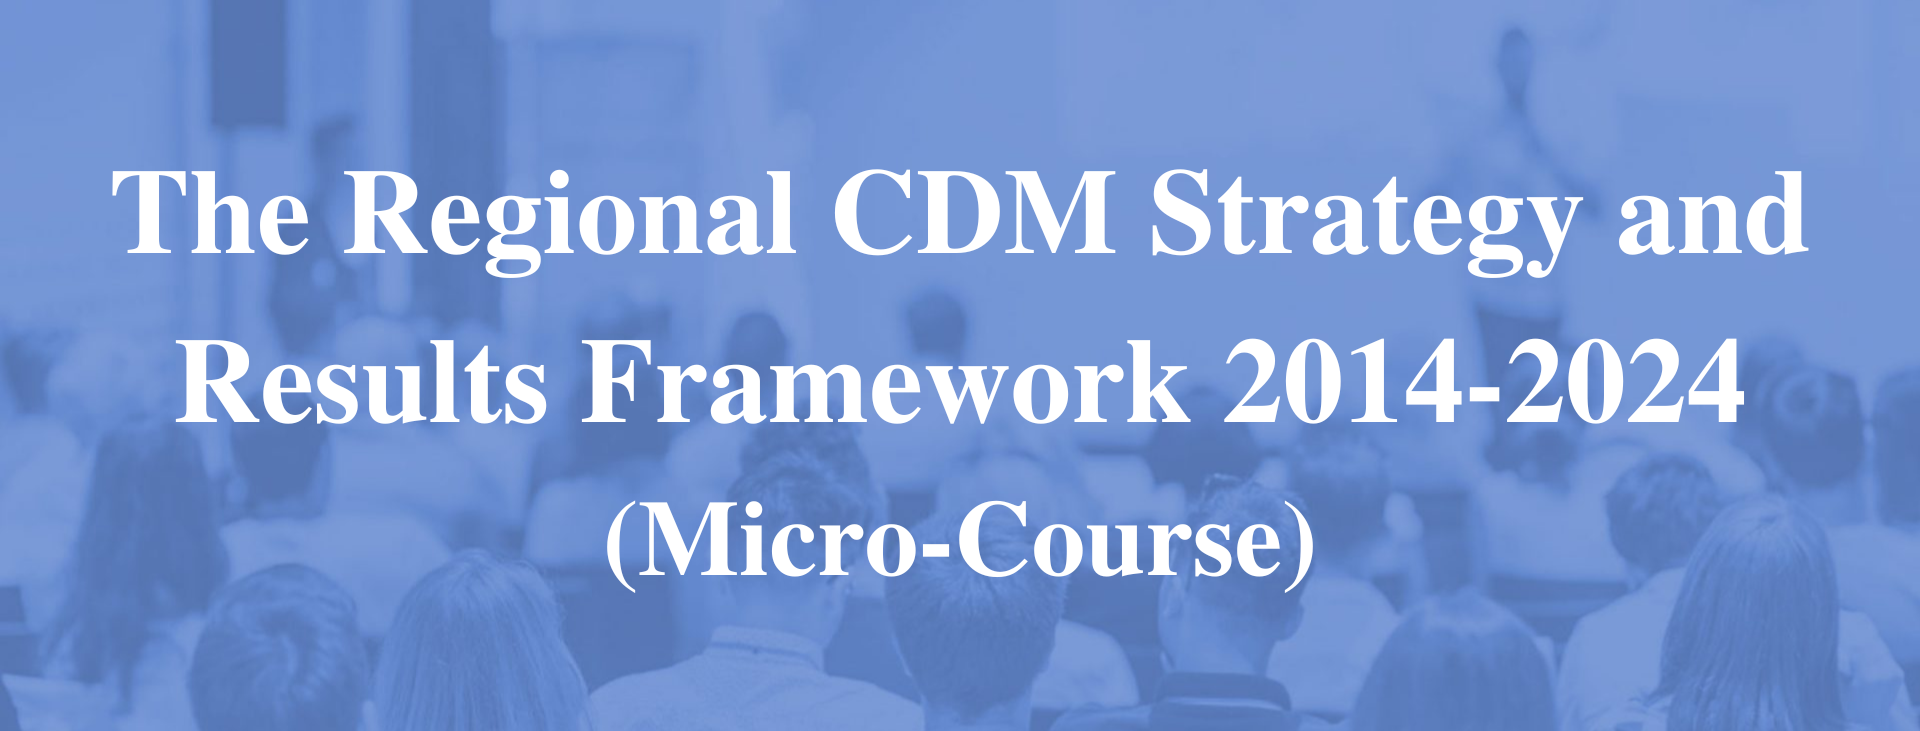 The Regional CDM Strategy and Results Framework 2014-2024 (Micro-course)